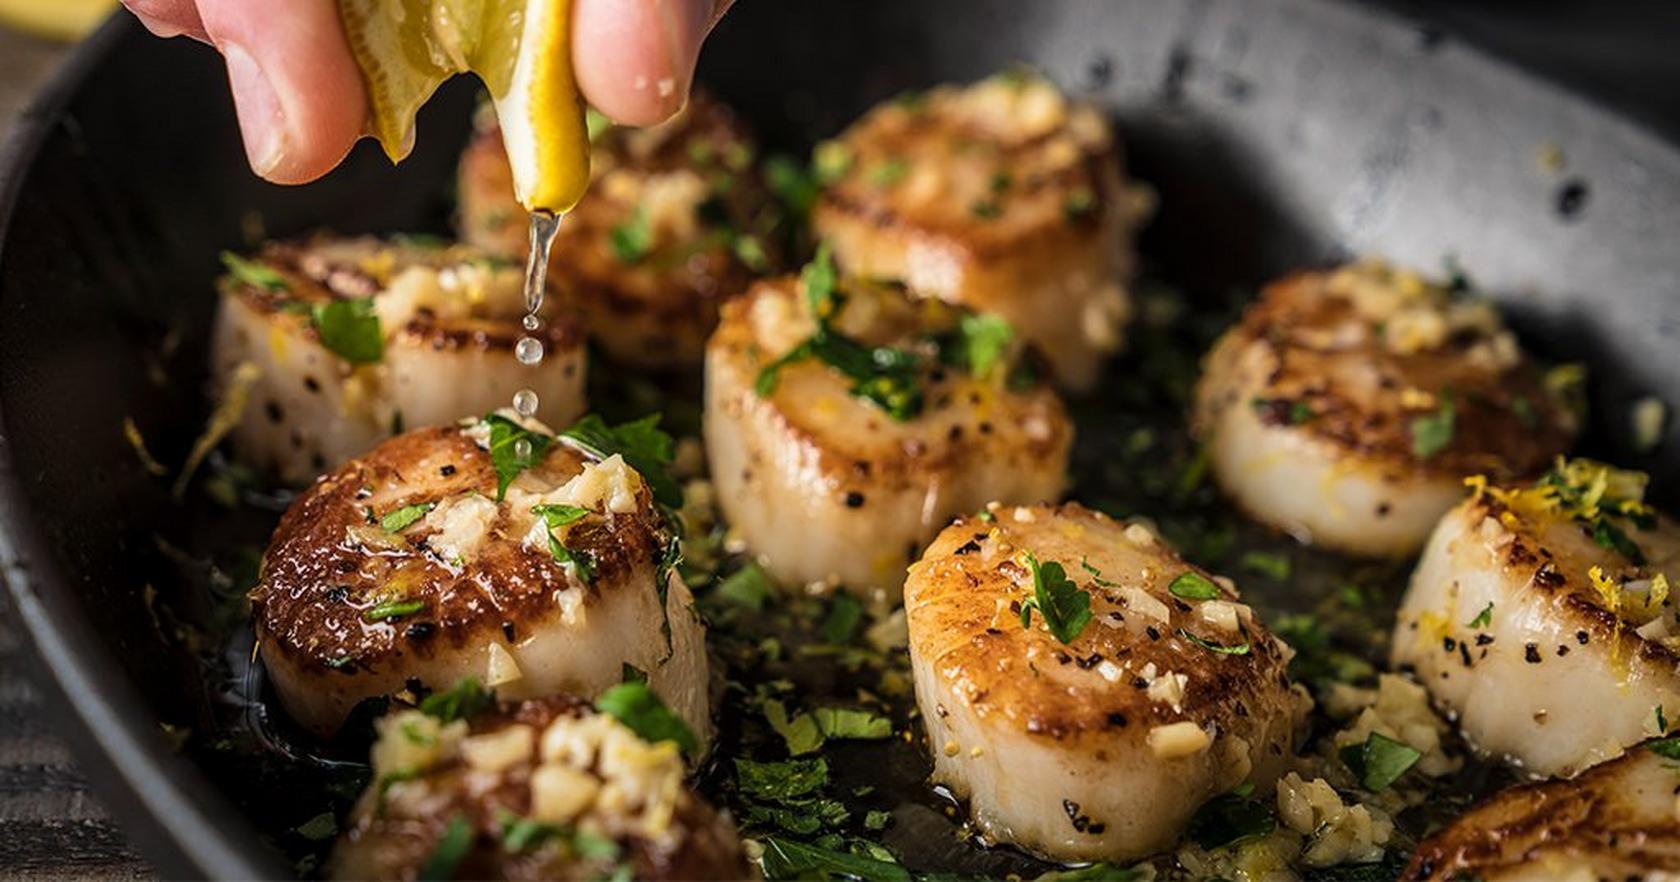 How to Grill Scallops